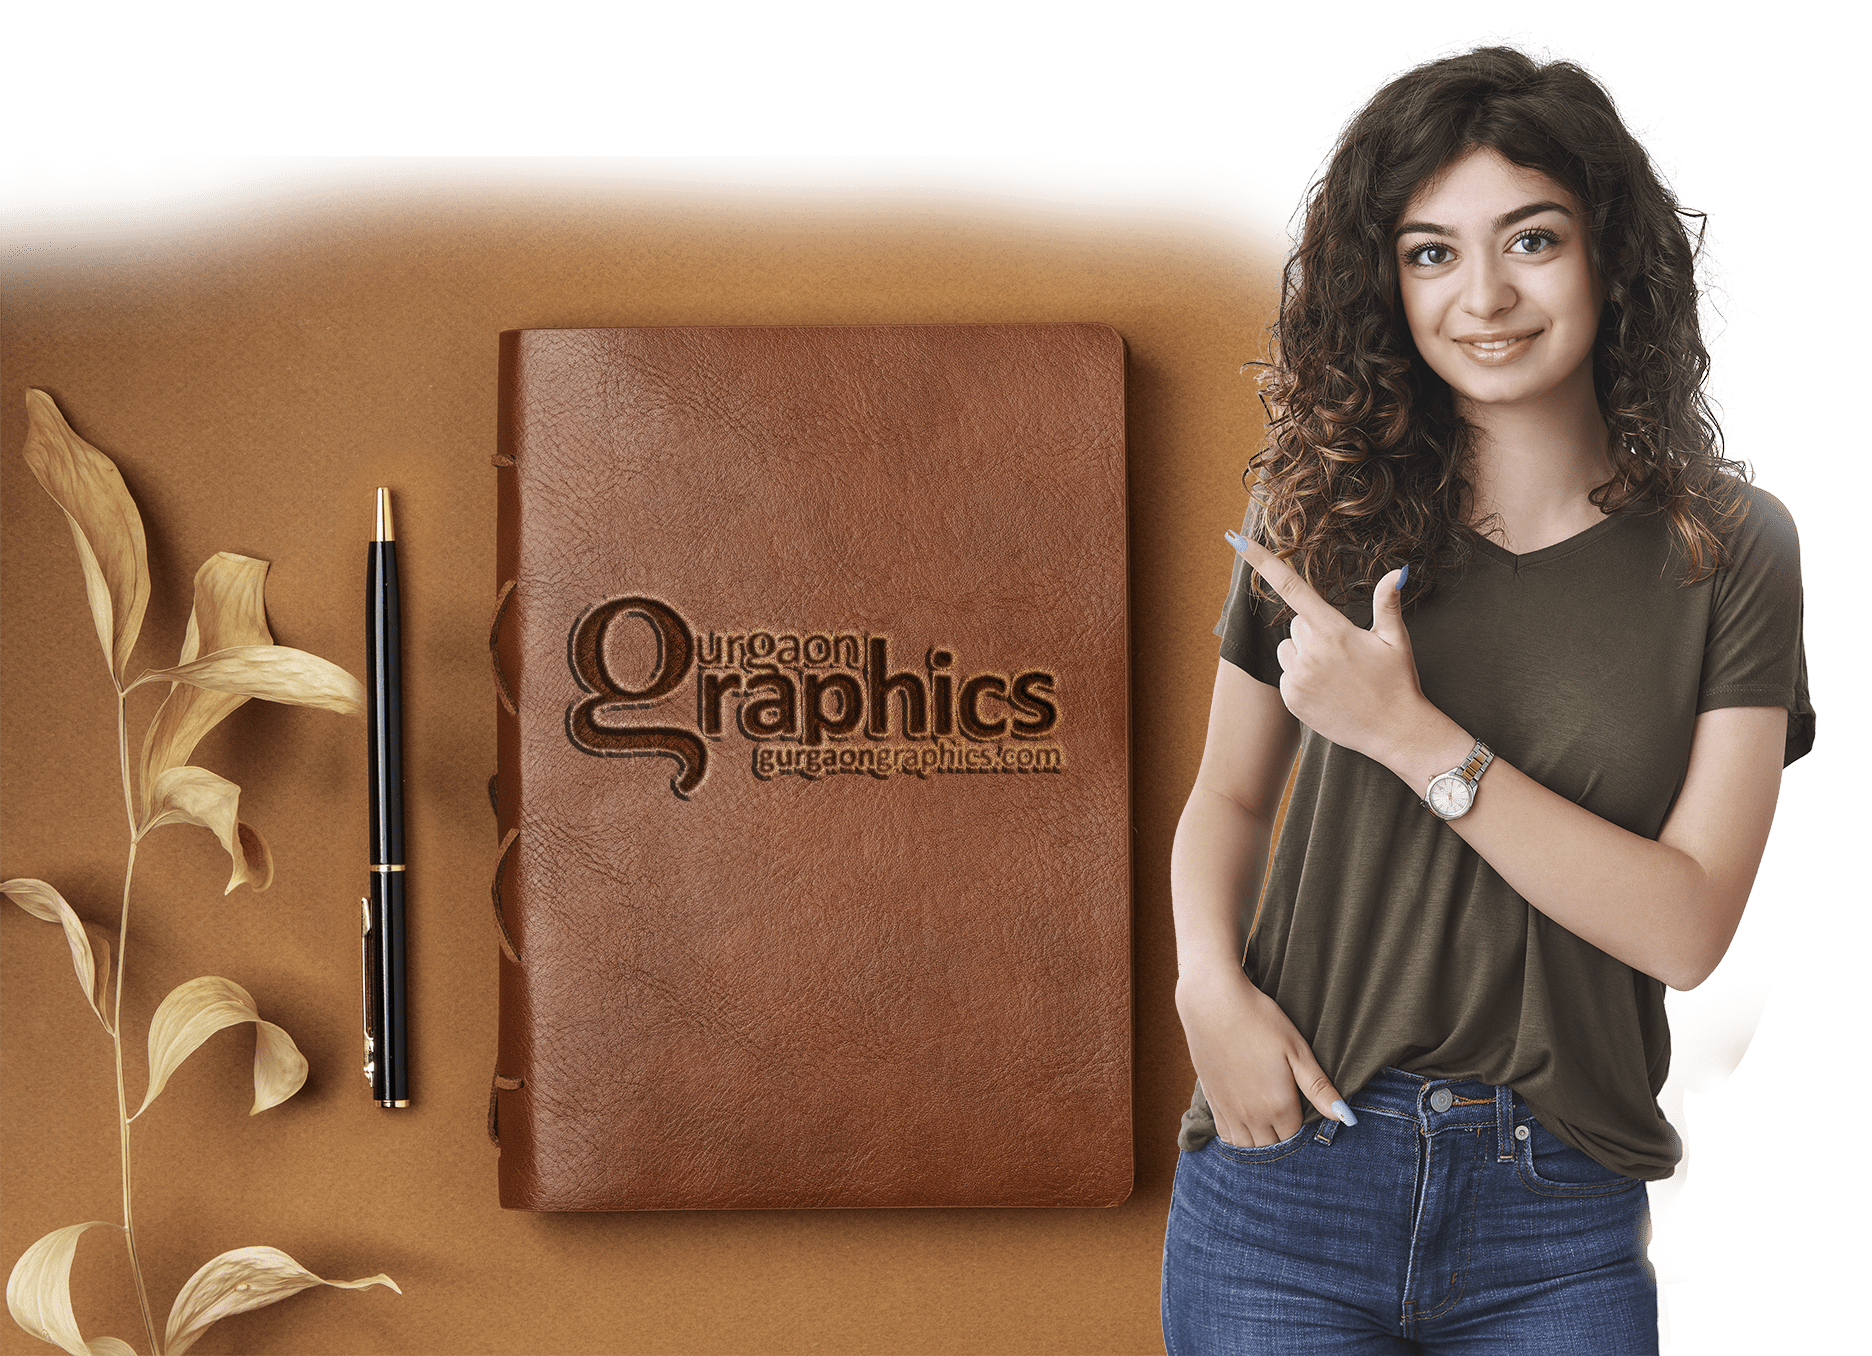 promotional items by gurgaon graphics